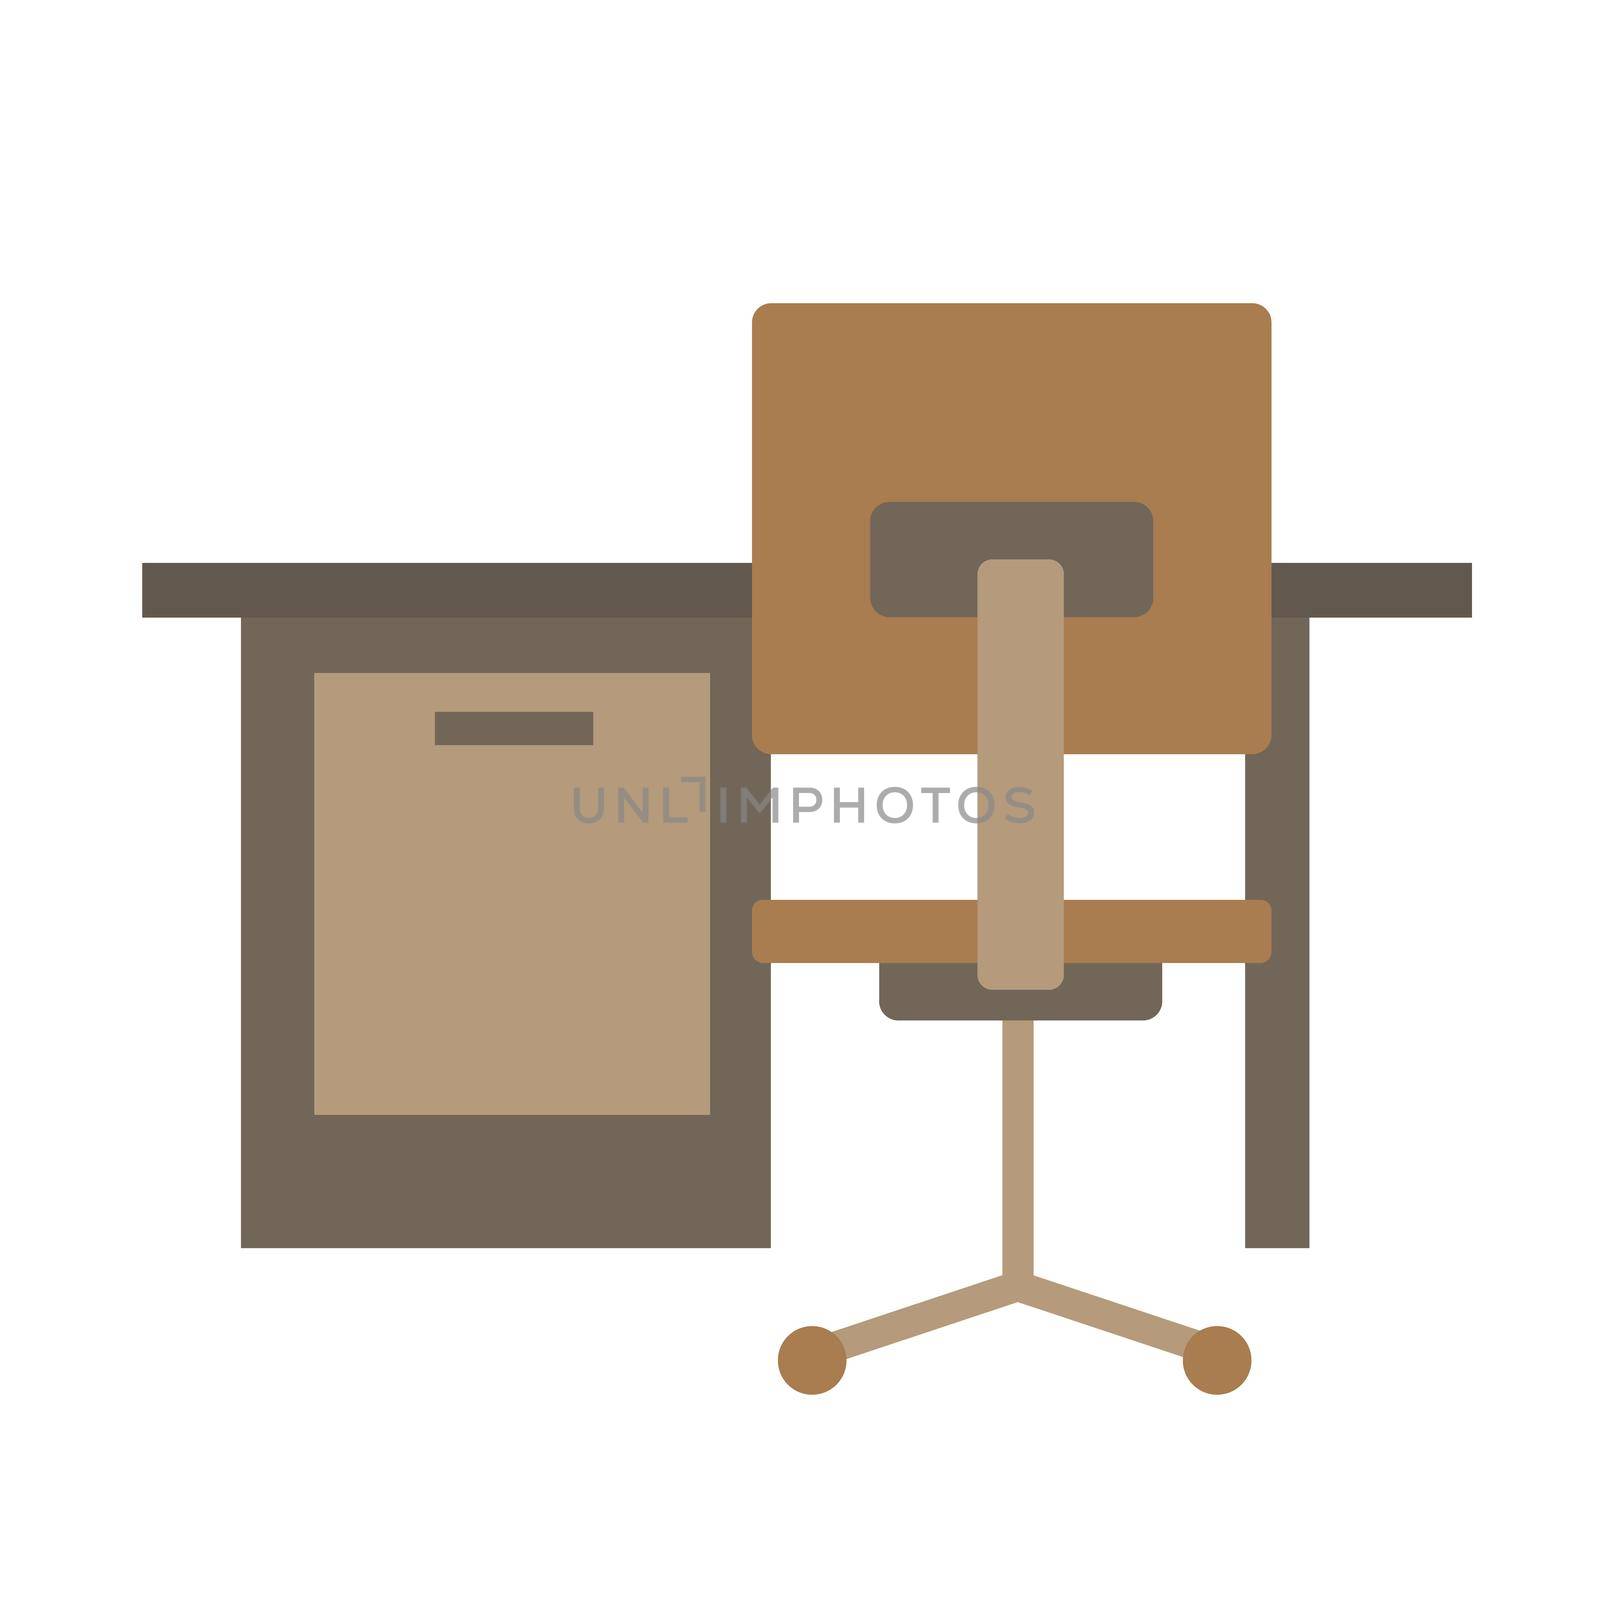 Office table and chair. Brown colors. Simple flat icon on white background.